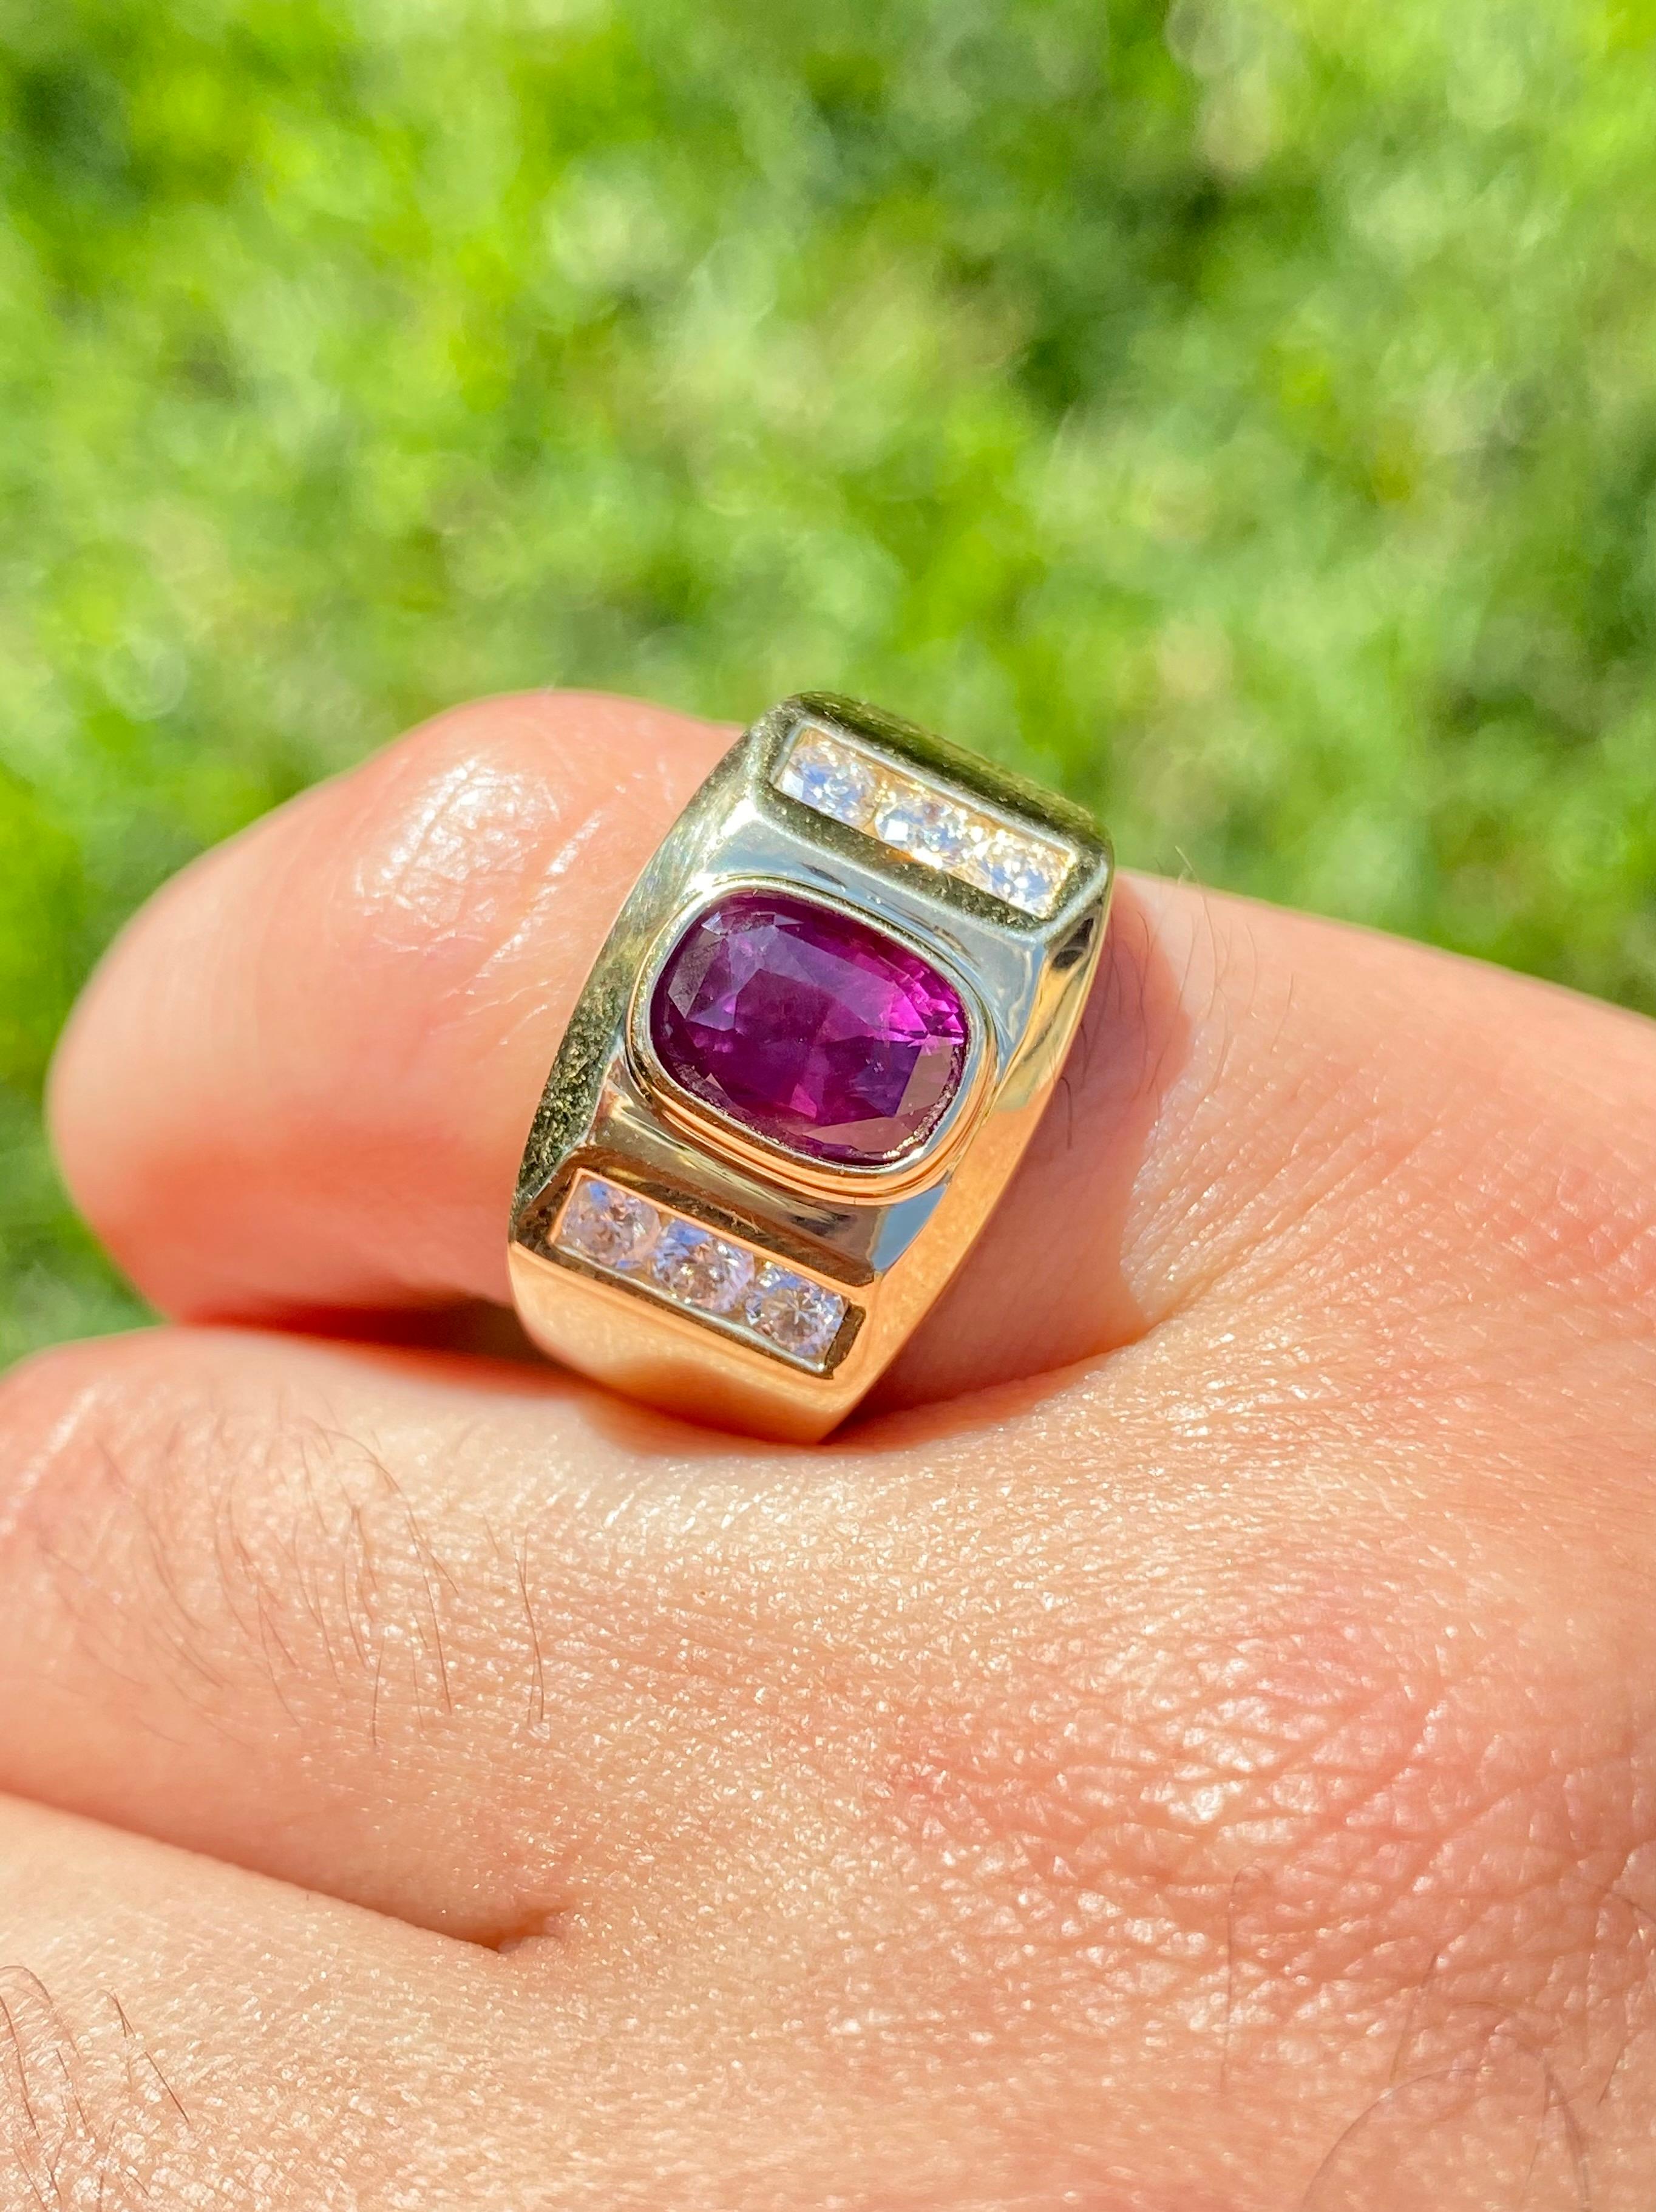 Centering a lovely Oval-Cut Purplish Red 2.70 Carat Ruby, framed by 6 Round-Brilliant Cut Diamonds totaling 0.45 Carats, and set in 14K Yellow Gold, this iconic Men's Ring design has stood the test of time.

Ring Details:
✔ Stone: Ruby
✔ Stone